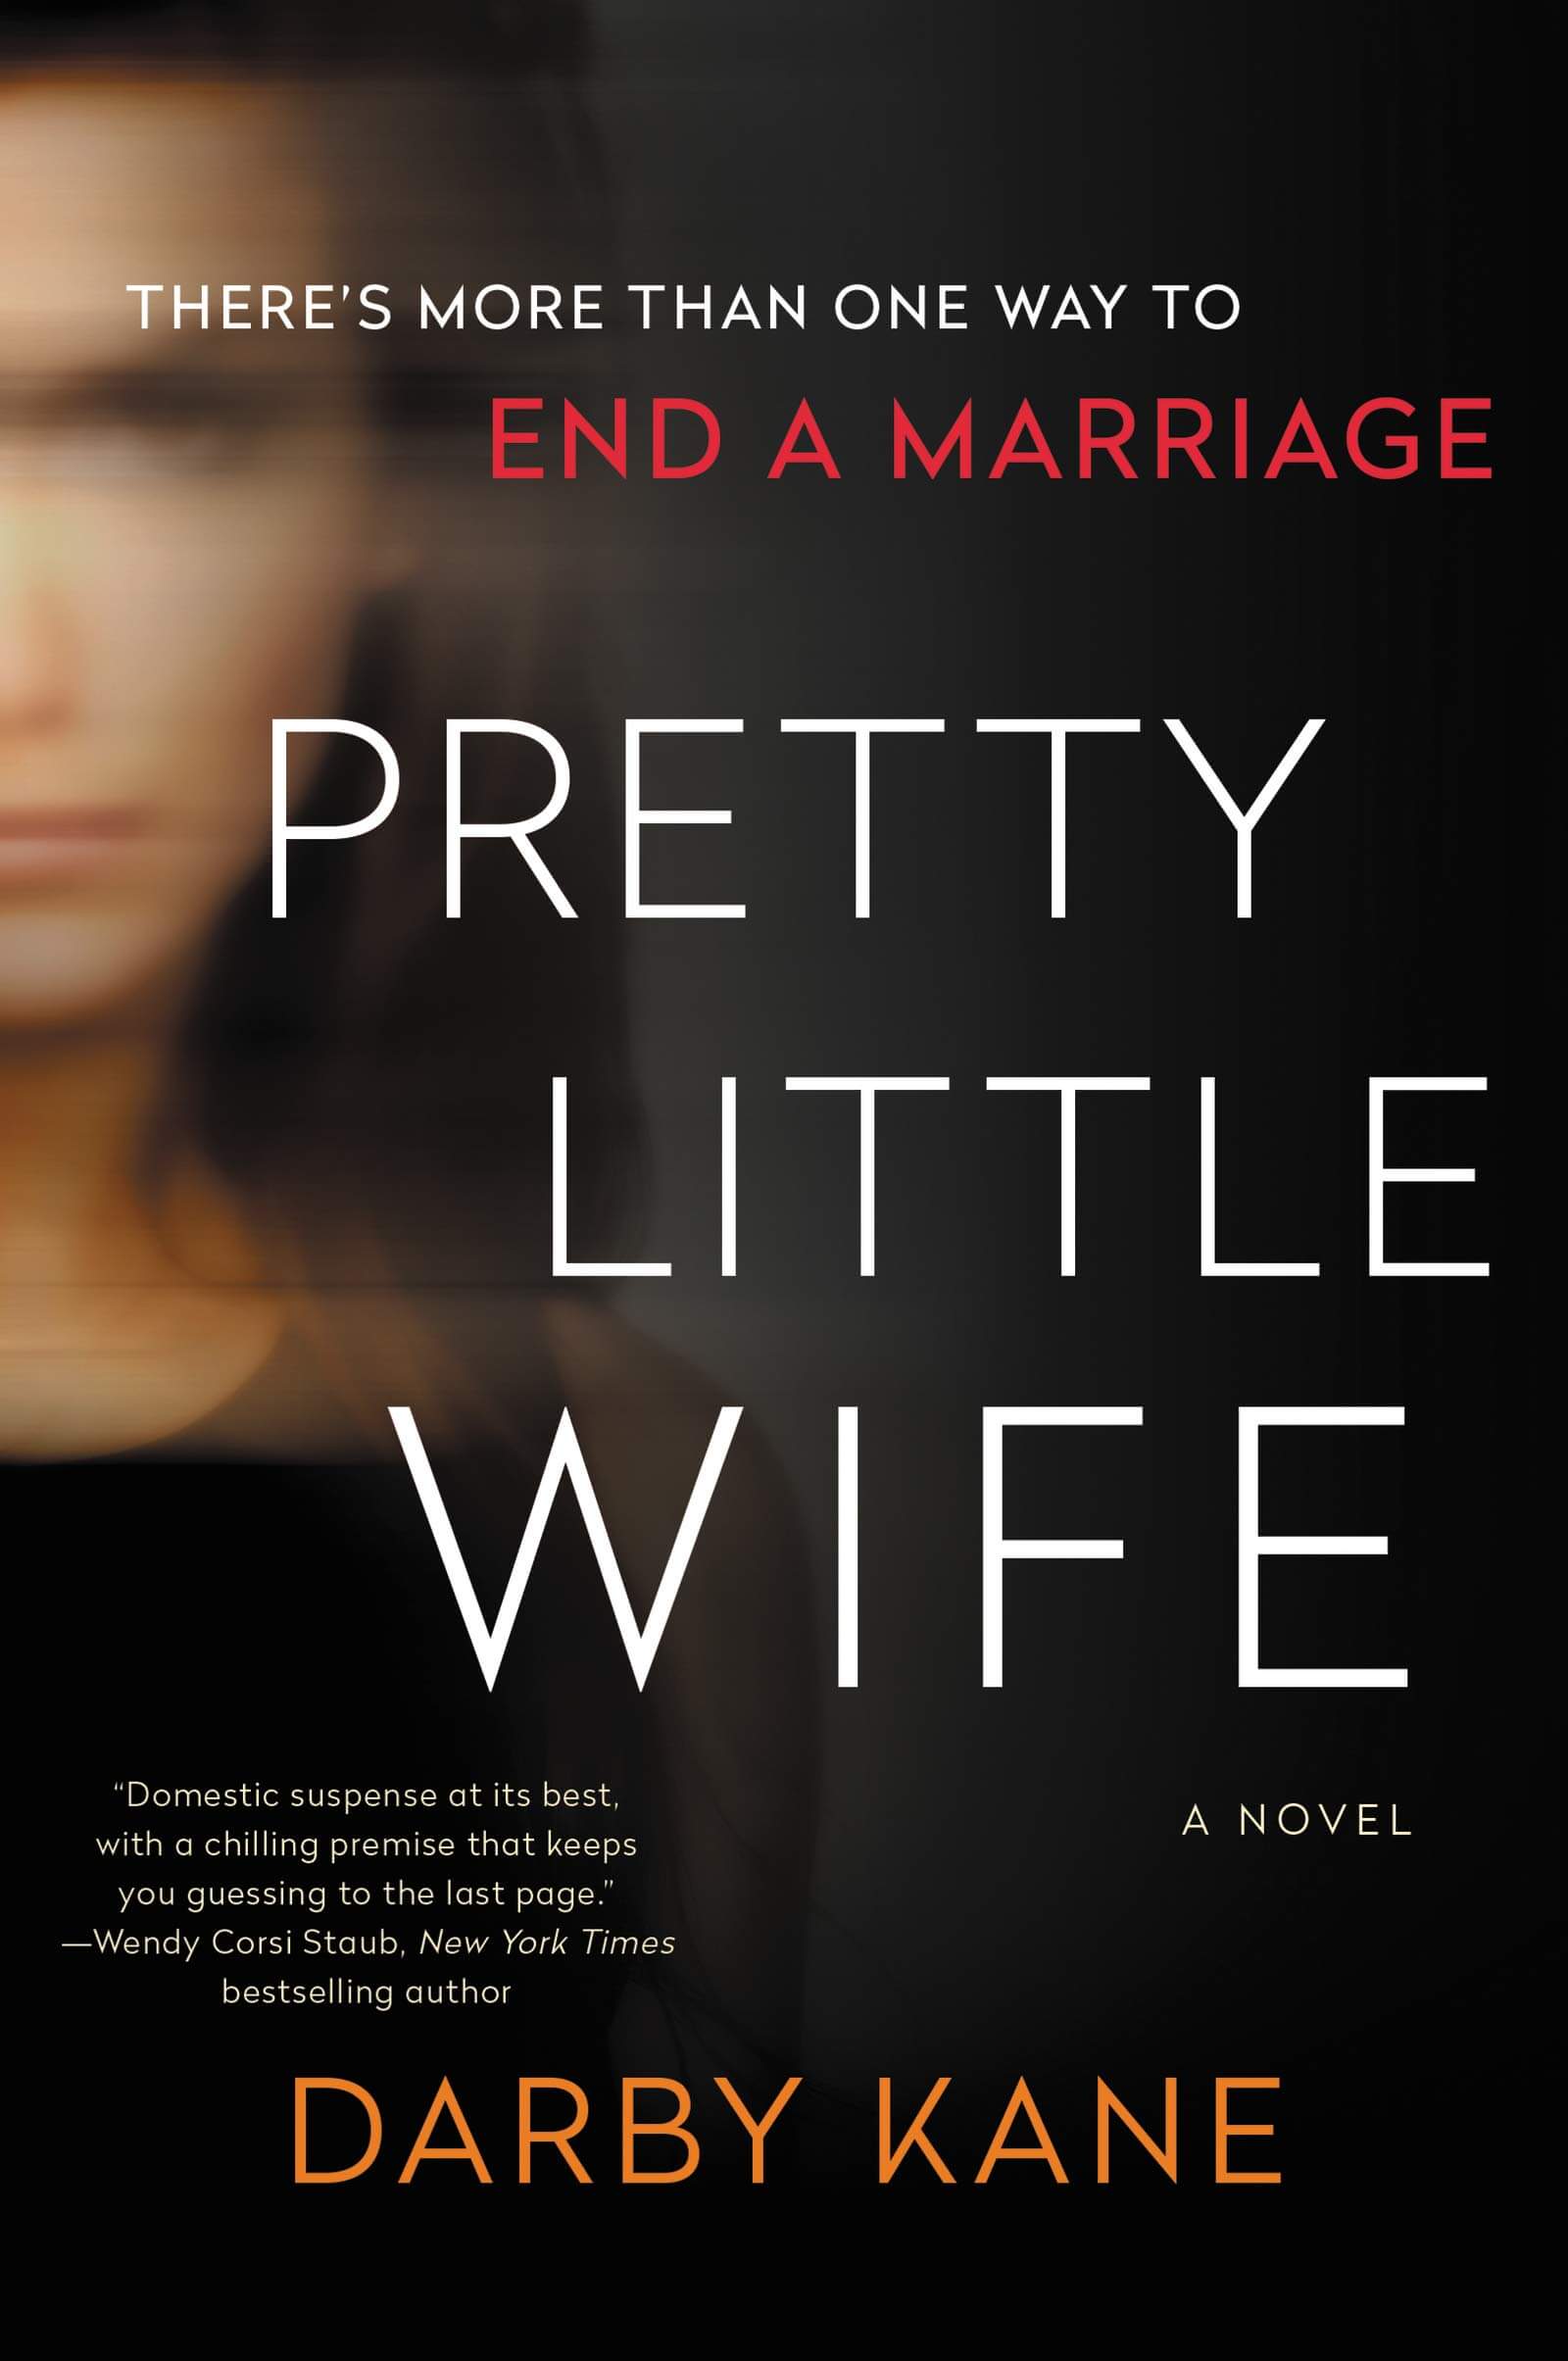 Cover of Pretty Little Wife by Darby Kane